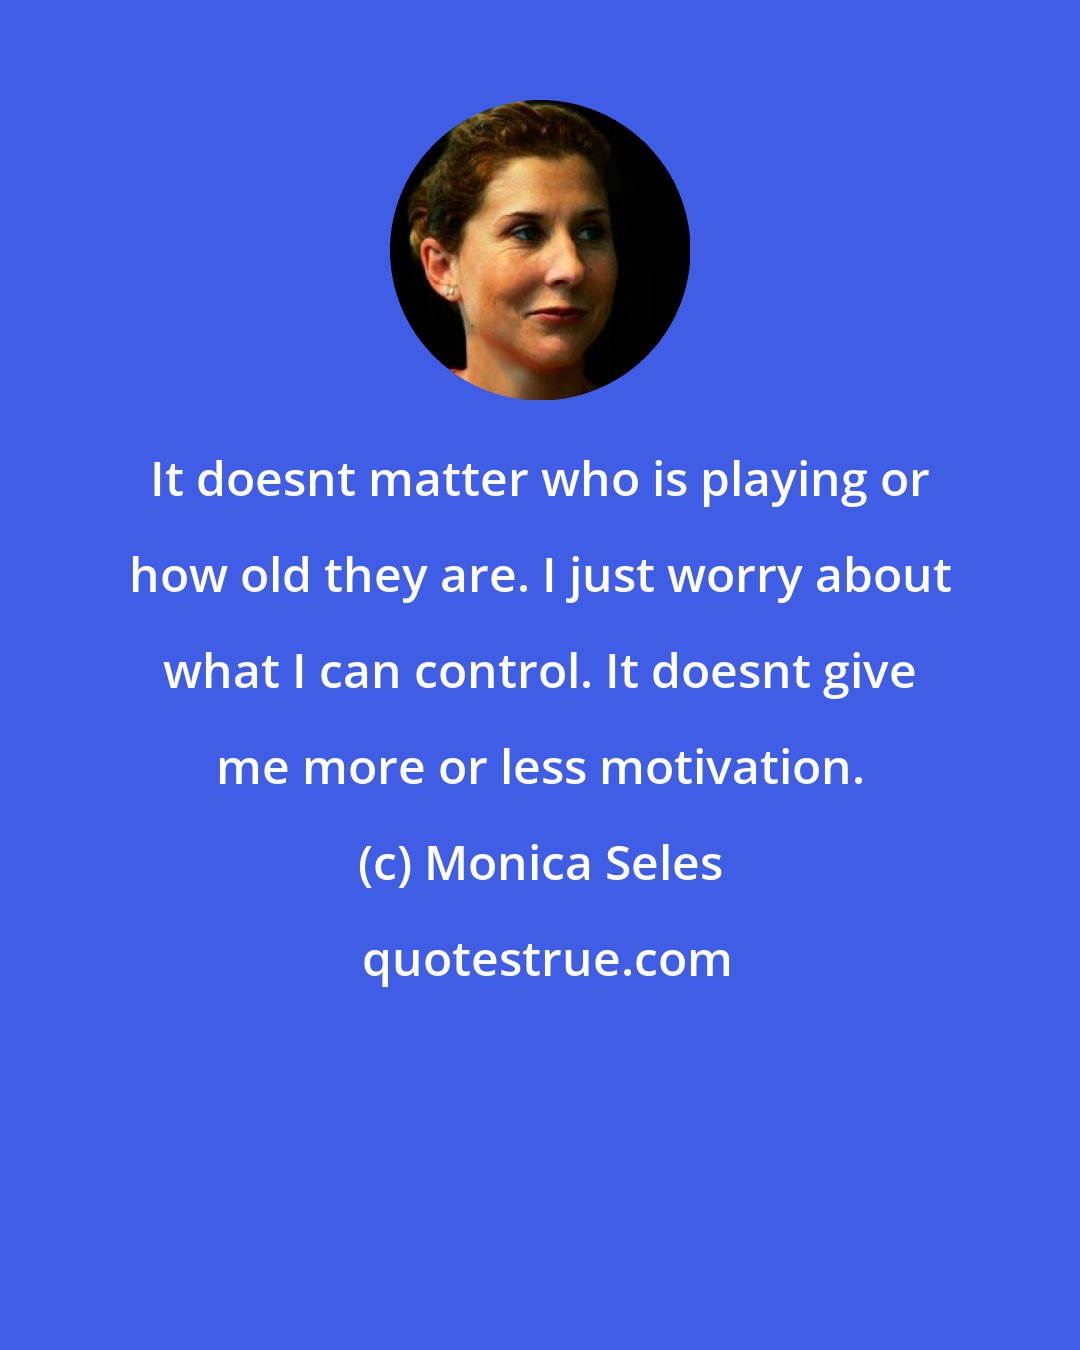 Monica Seles: It doesnt matter who is playing or how old they are. I just worry about what I can control. It doesnt give me more or less motivation.